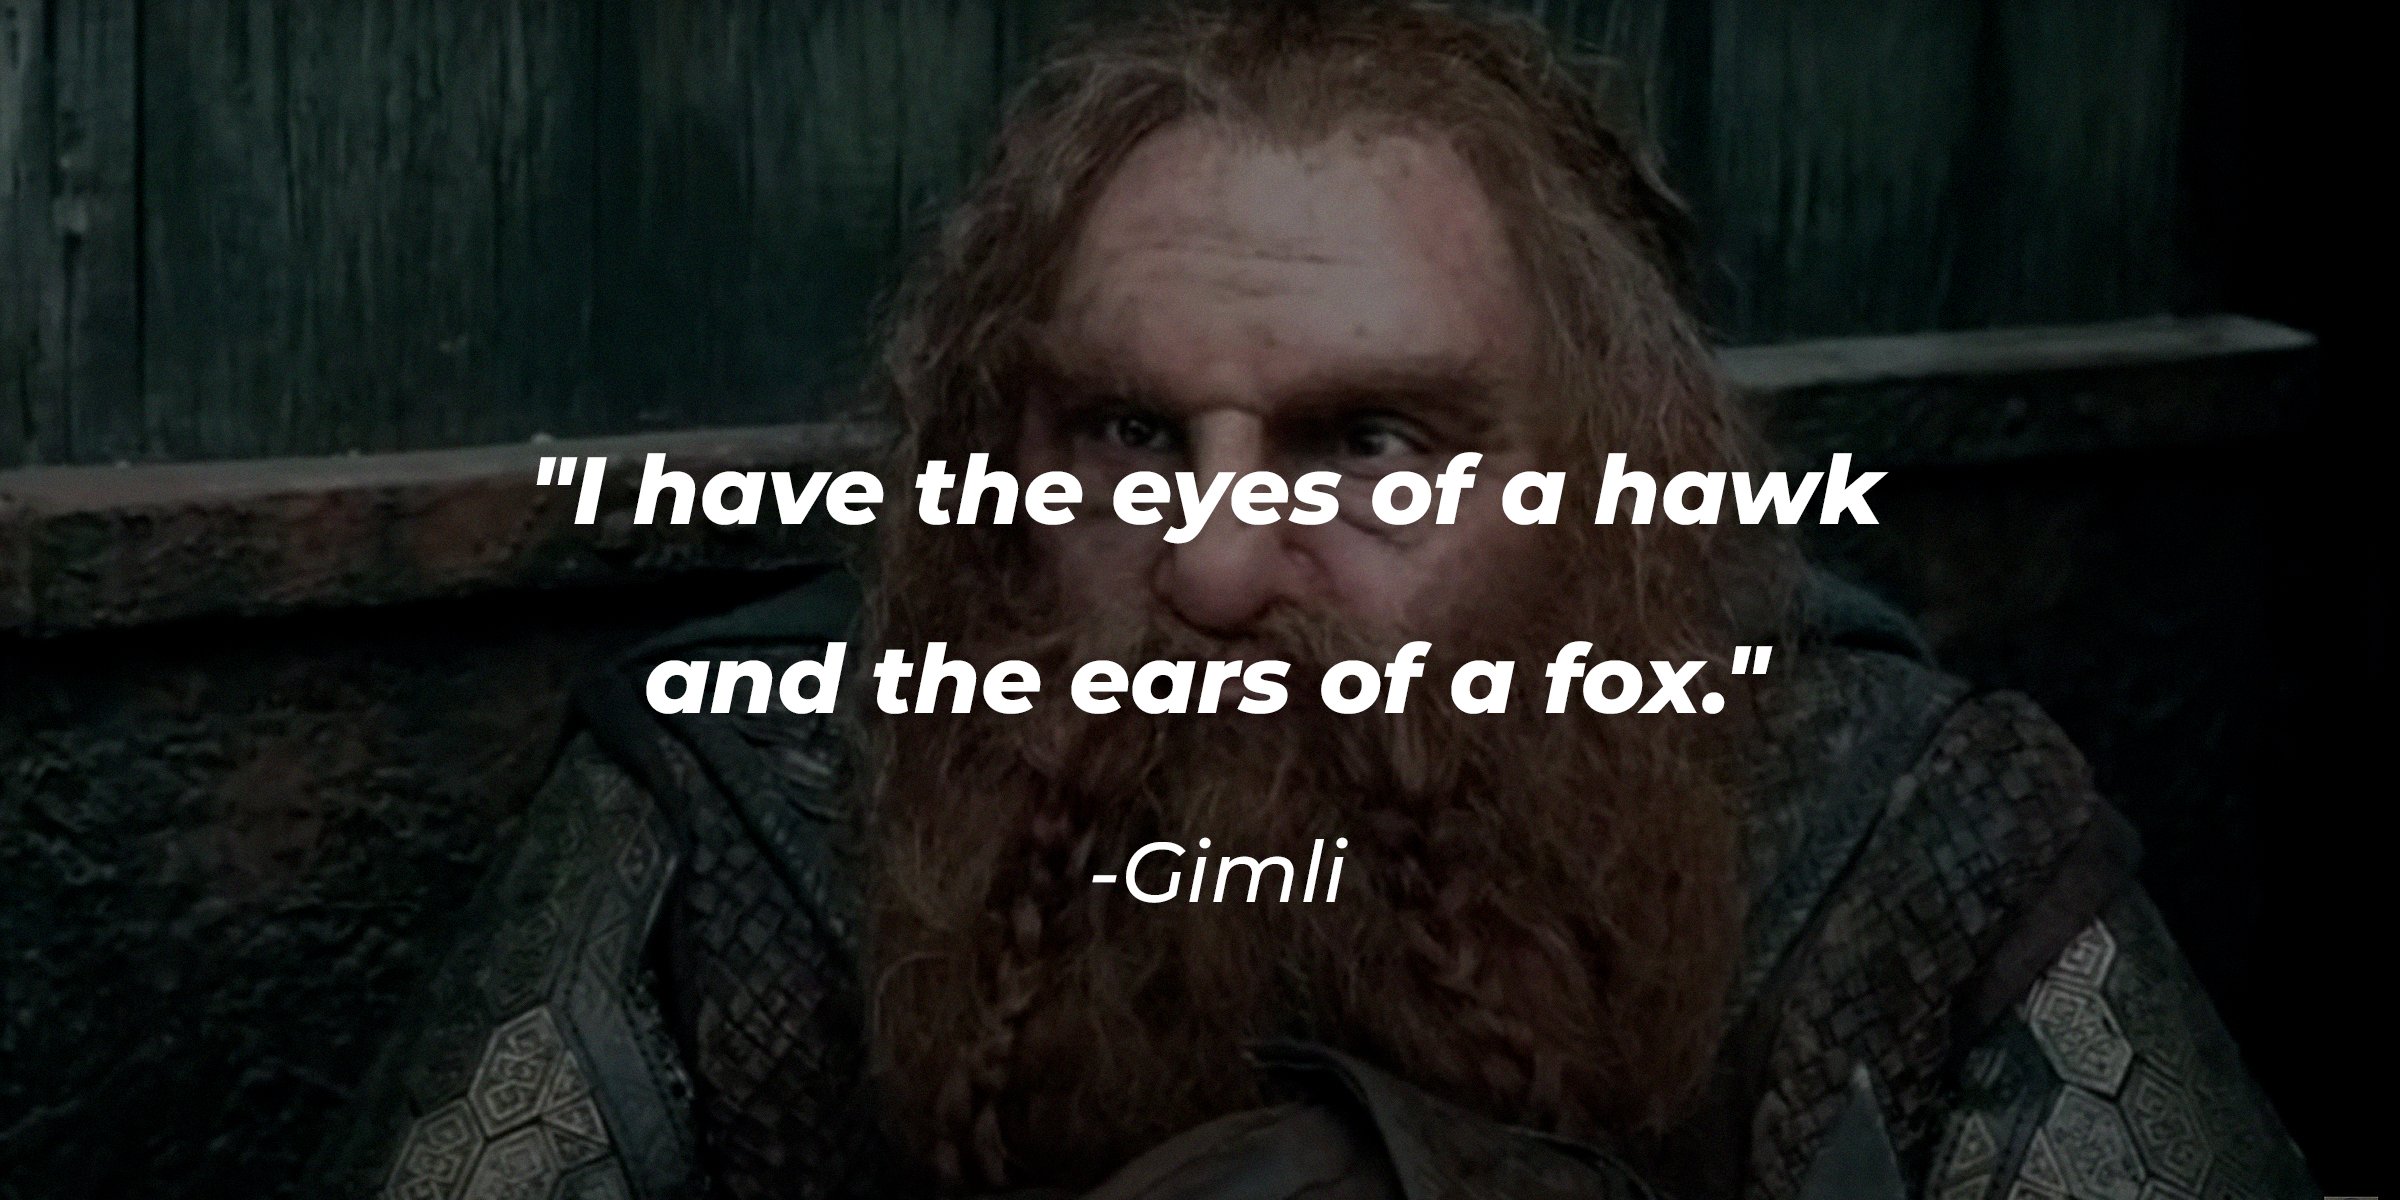 A photo of Gimli with the quote: "I have the eyes of a hawk and the ears of a fox." | Source: facebook.com/lordoftheringstrilogy